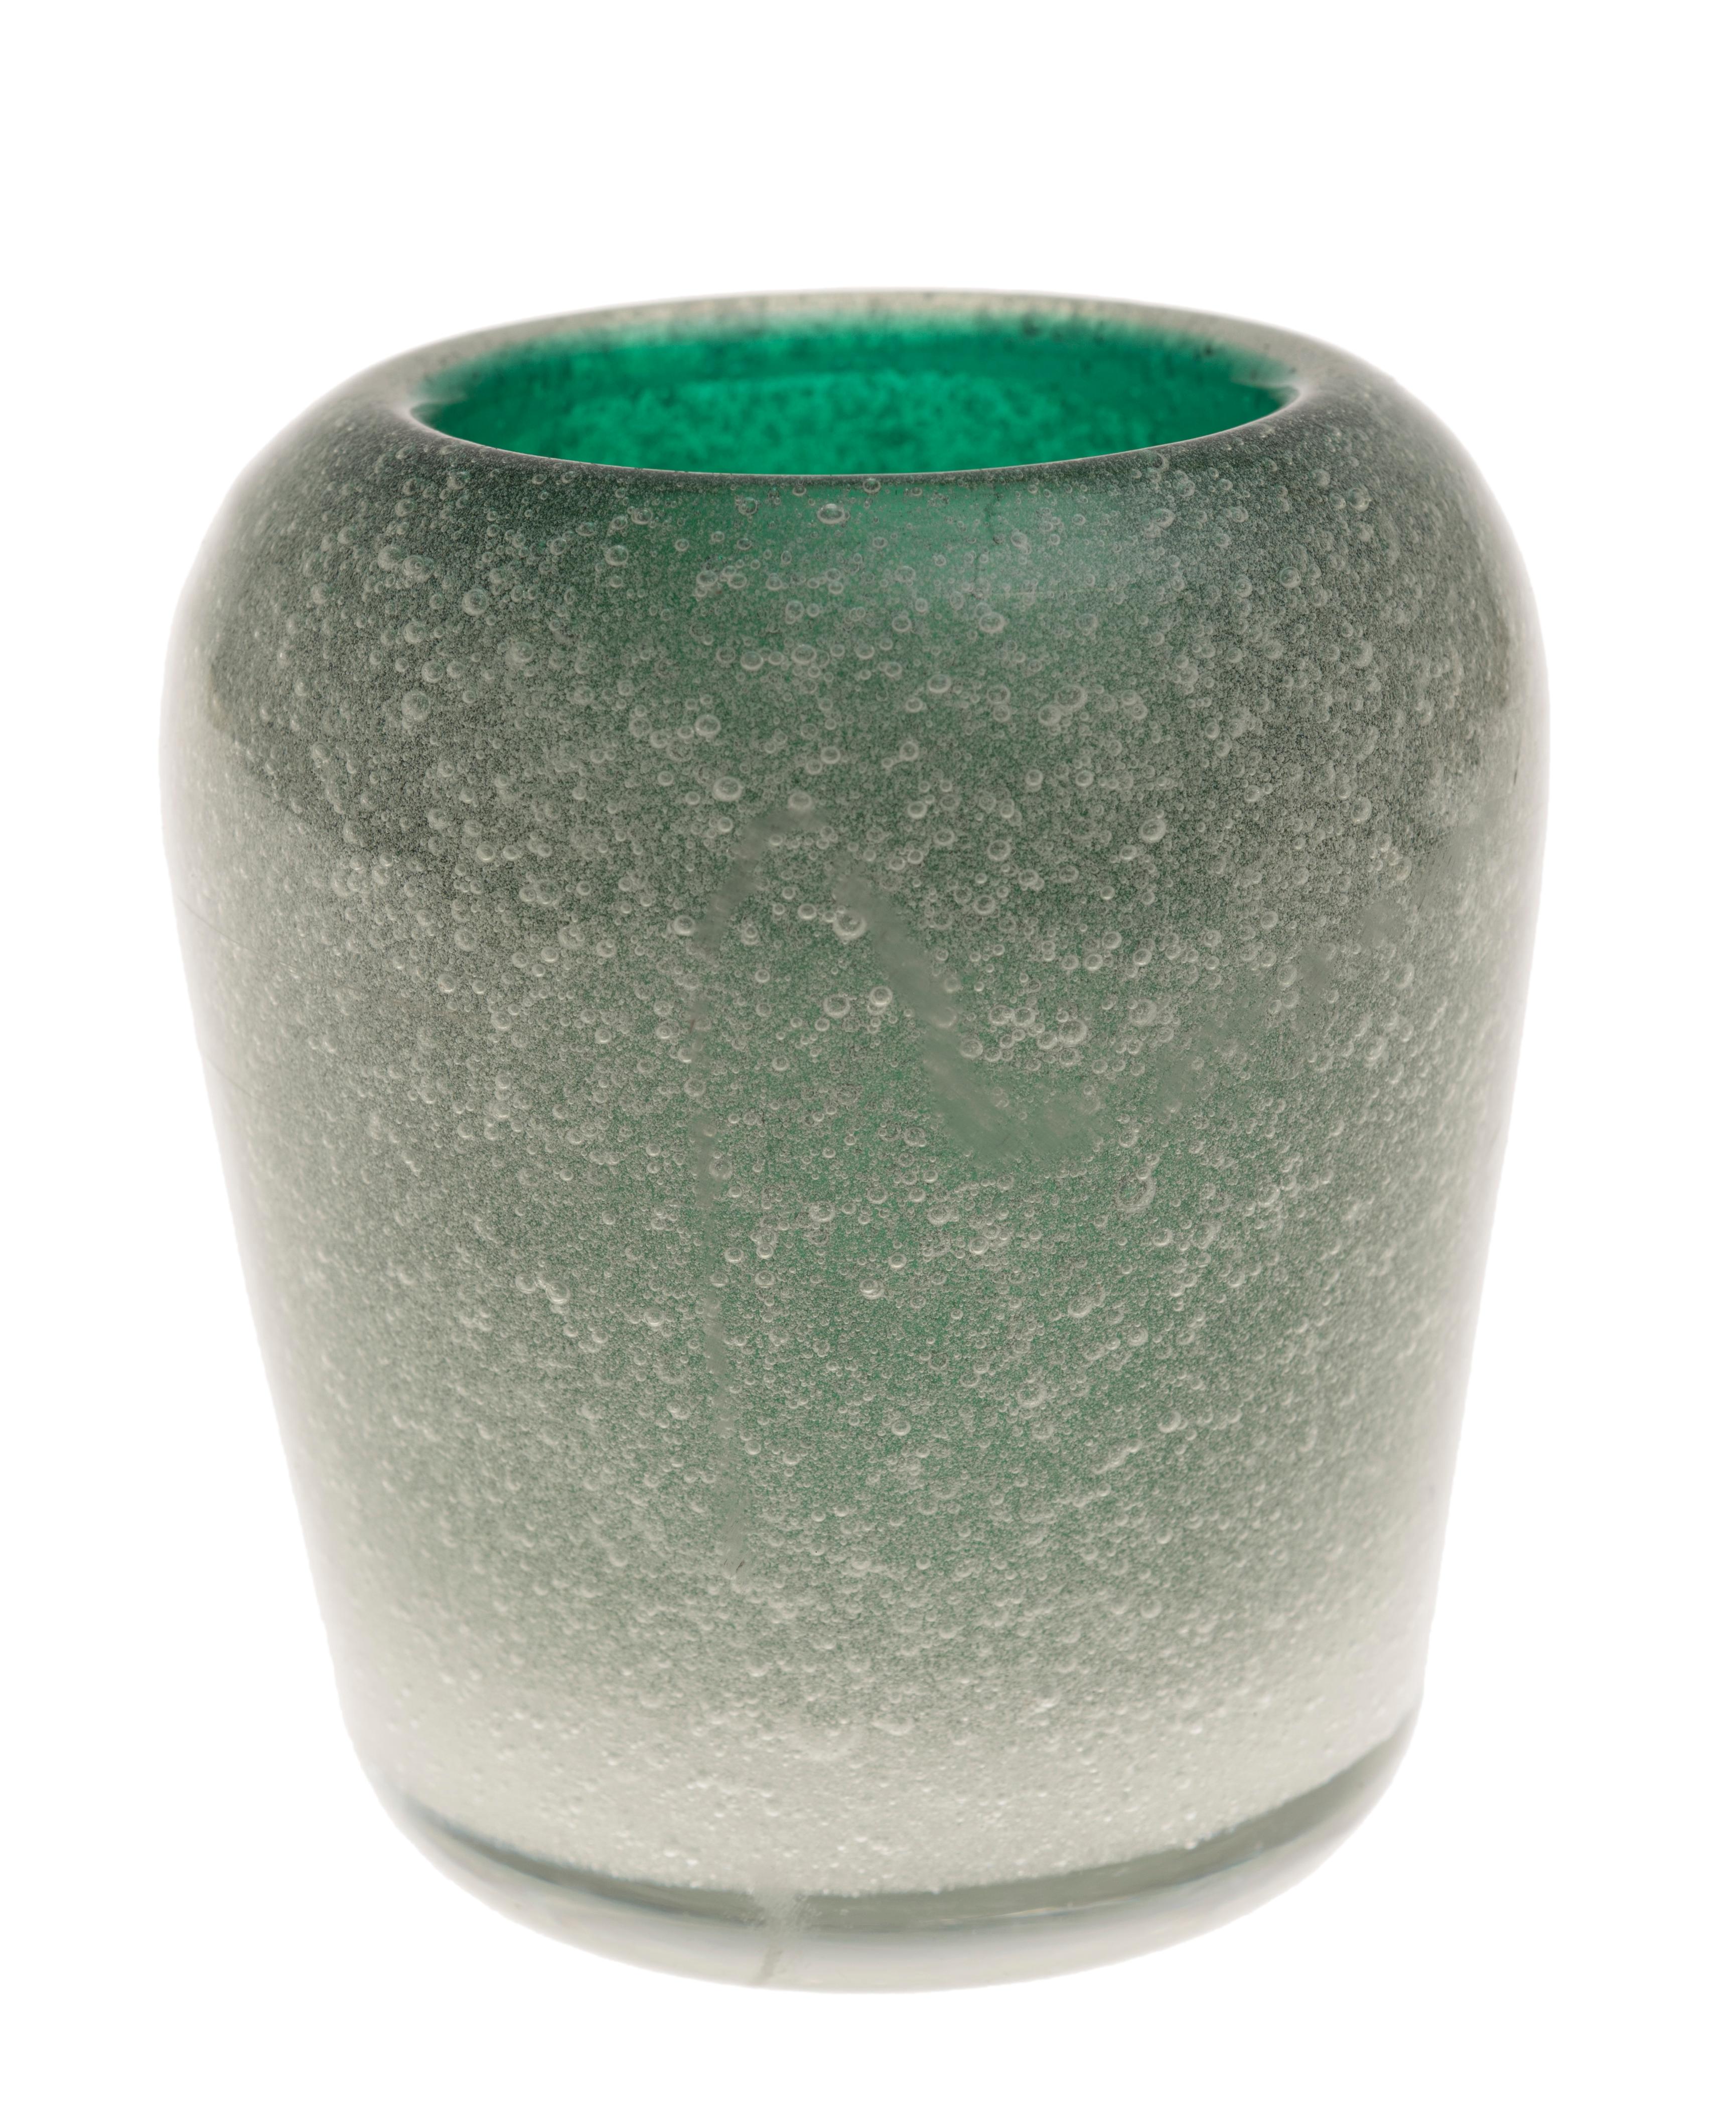 Murano green vase is an original decorative object realized by Carlo Scarpa for Venini in circa 1955.

This beautiful vintage vase is realized by one of the most famous designers of the 20th century.

Very good conditions.

This object is